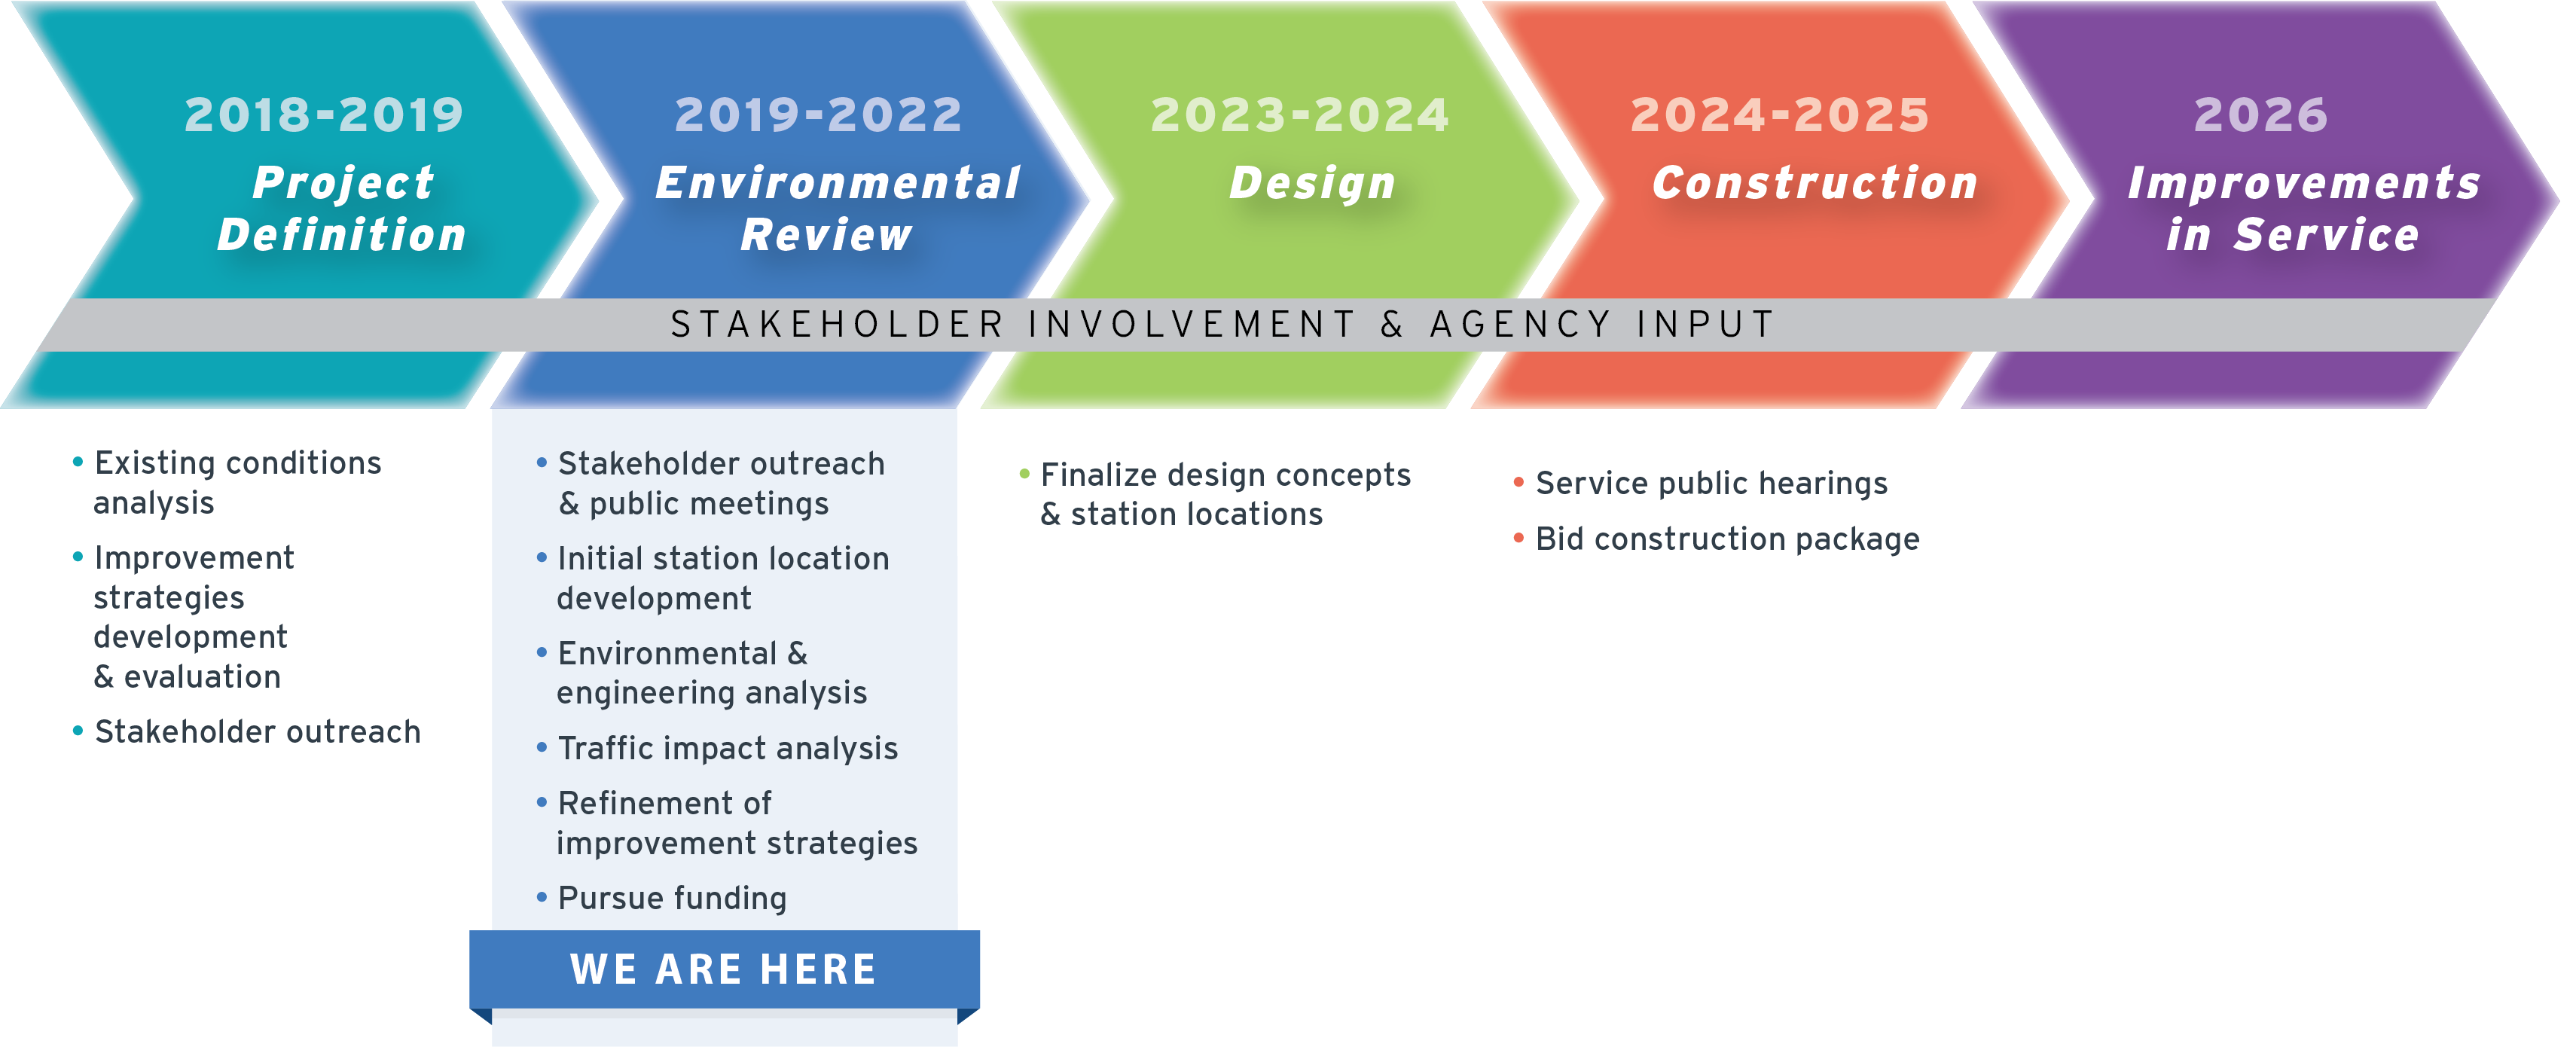 graphic showing the phases of development between 2018 and 2026